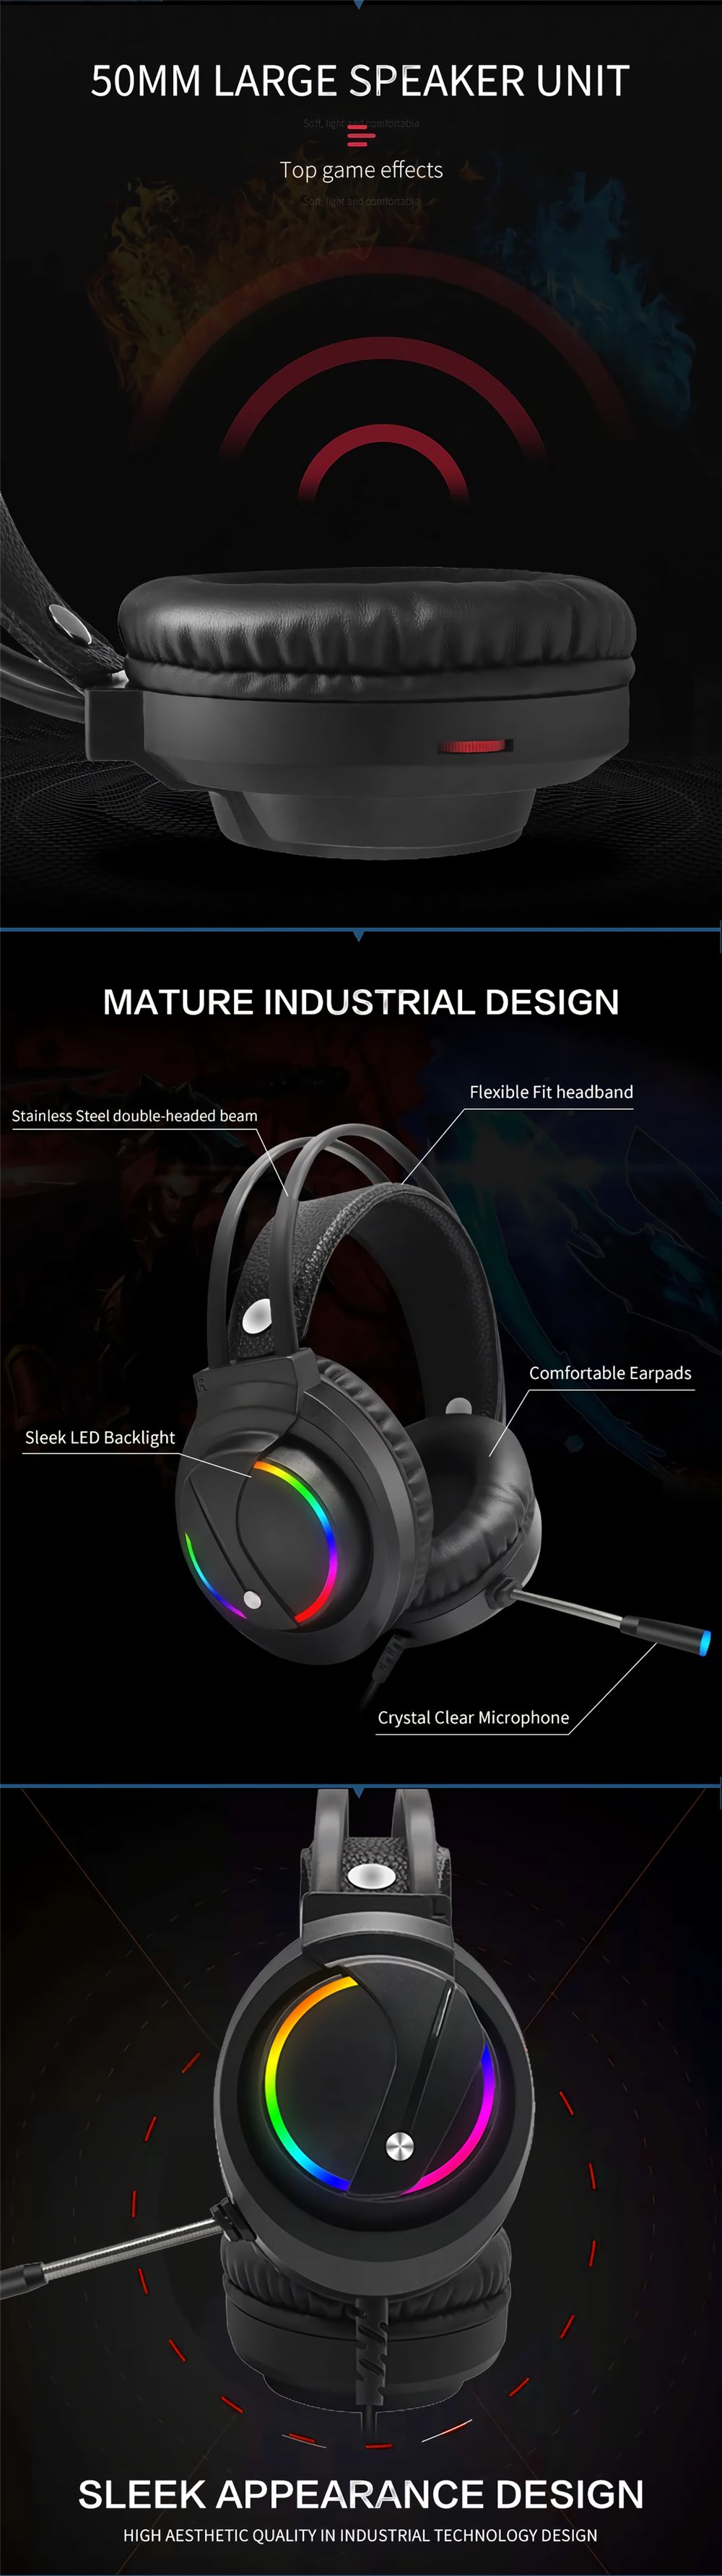 Tuner-K1-Game-Headphone-USB-Wired-71-Channel-360ordm-Surounding-Sound-50mm-Driver-Bass-Gaming-Headse-1689360